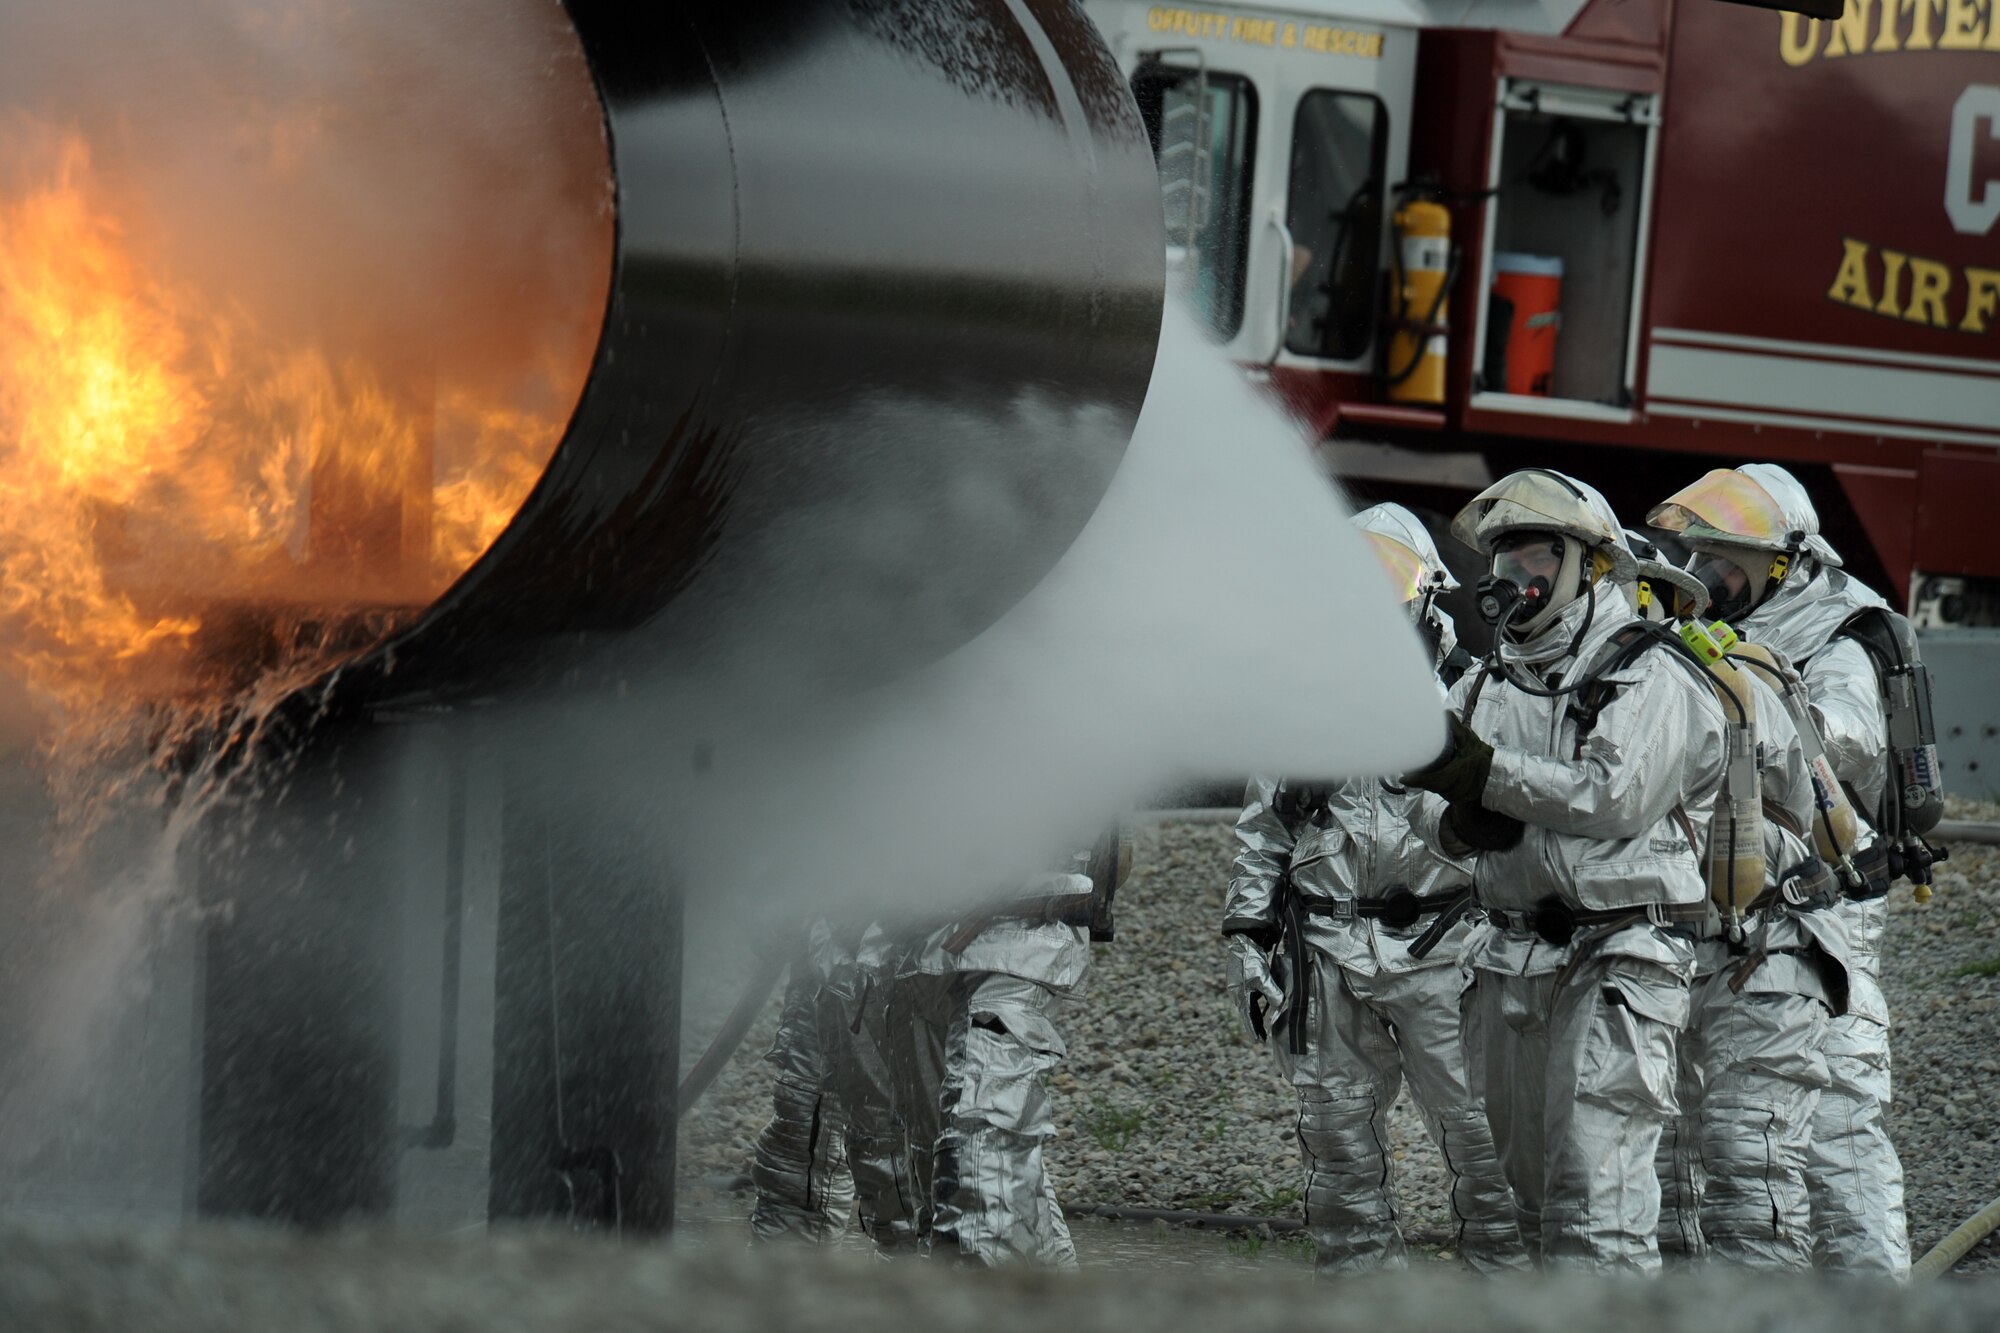 OFFUTT AIR FORCE BASE Neb. -- Offutt firefighters extinguish the flames in a simulated aircraft fire trainer during a joint training exercise here May 6. Firefighters from Offutt, Eppley airfield and guard and reserve units participated in the training.

U.S. Air Force photo by Josh Plueger